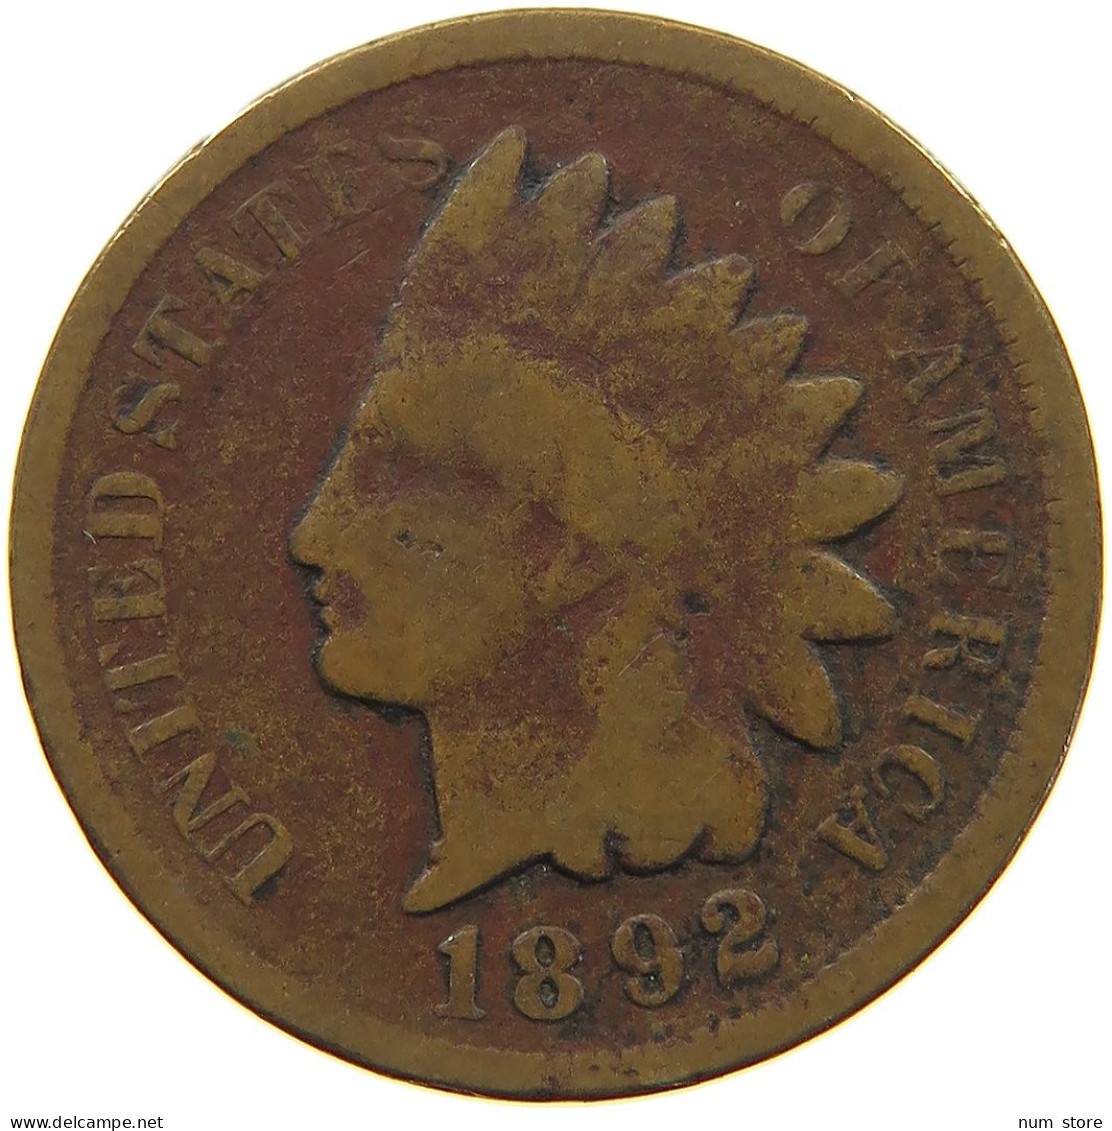 UNITED STATES OF AMERICA CENT 1892 INDIAN HEAD #c019 0349 - 1859-1909: Indian Head